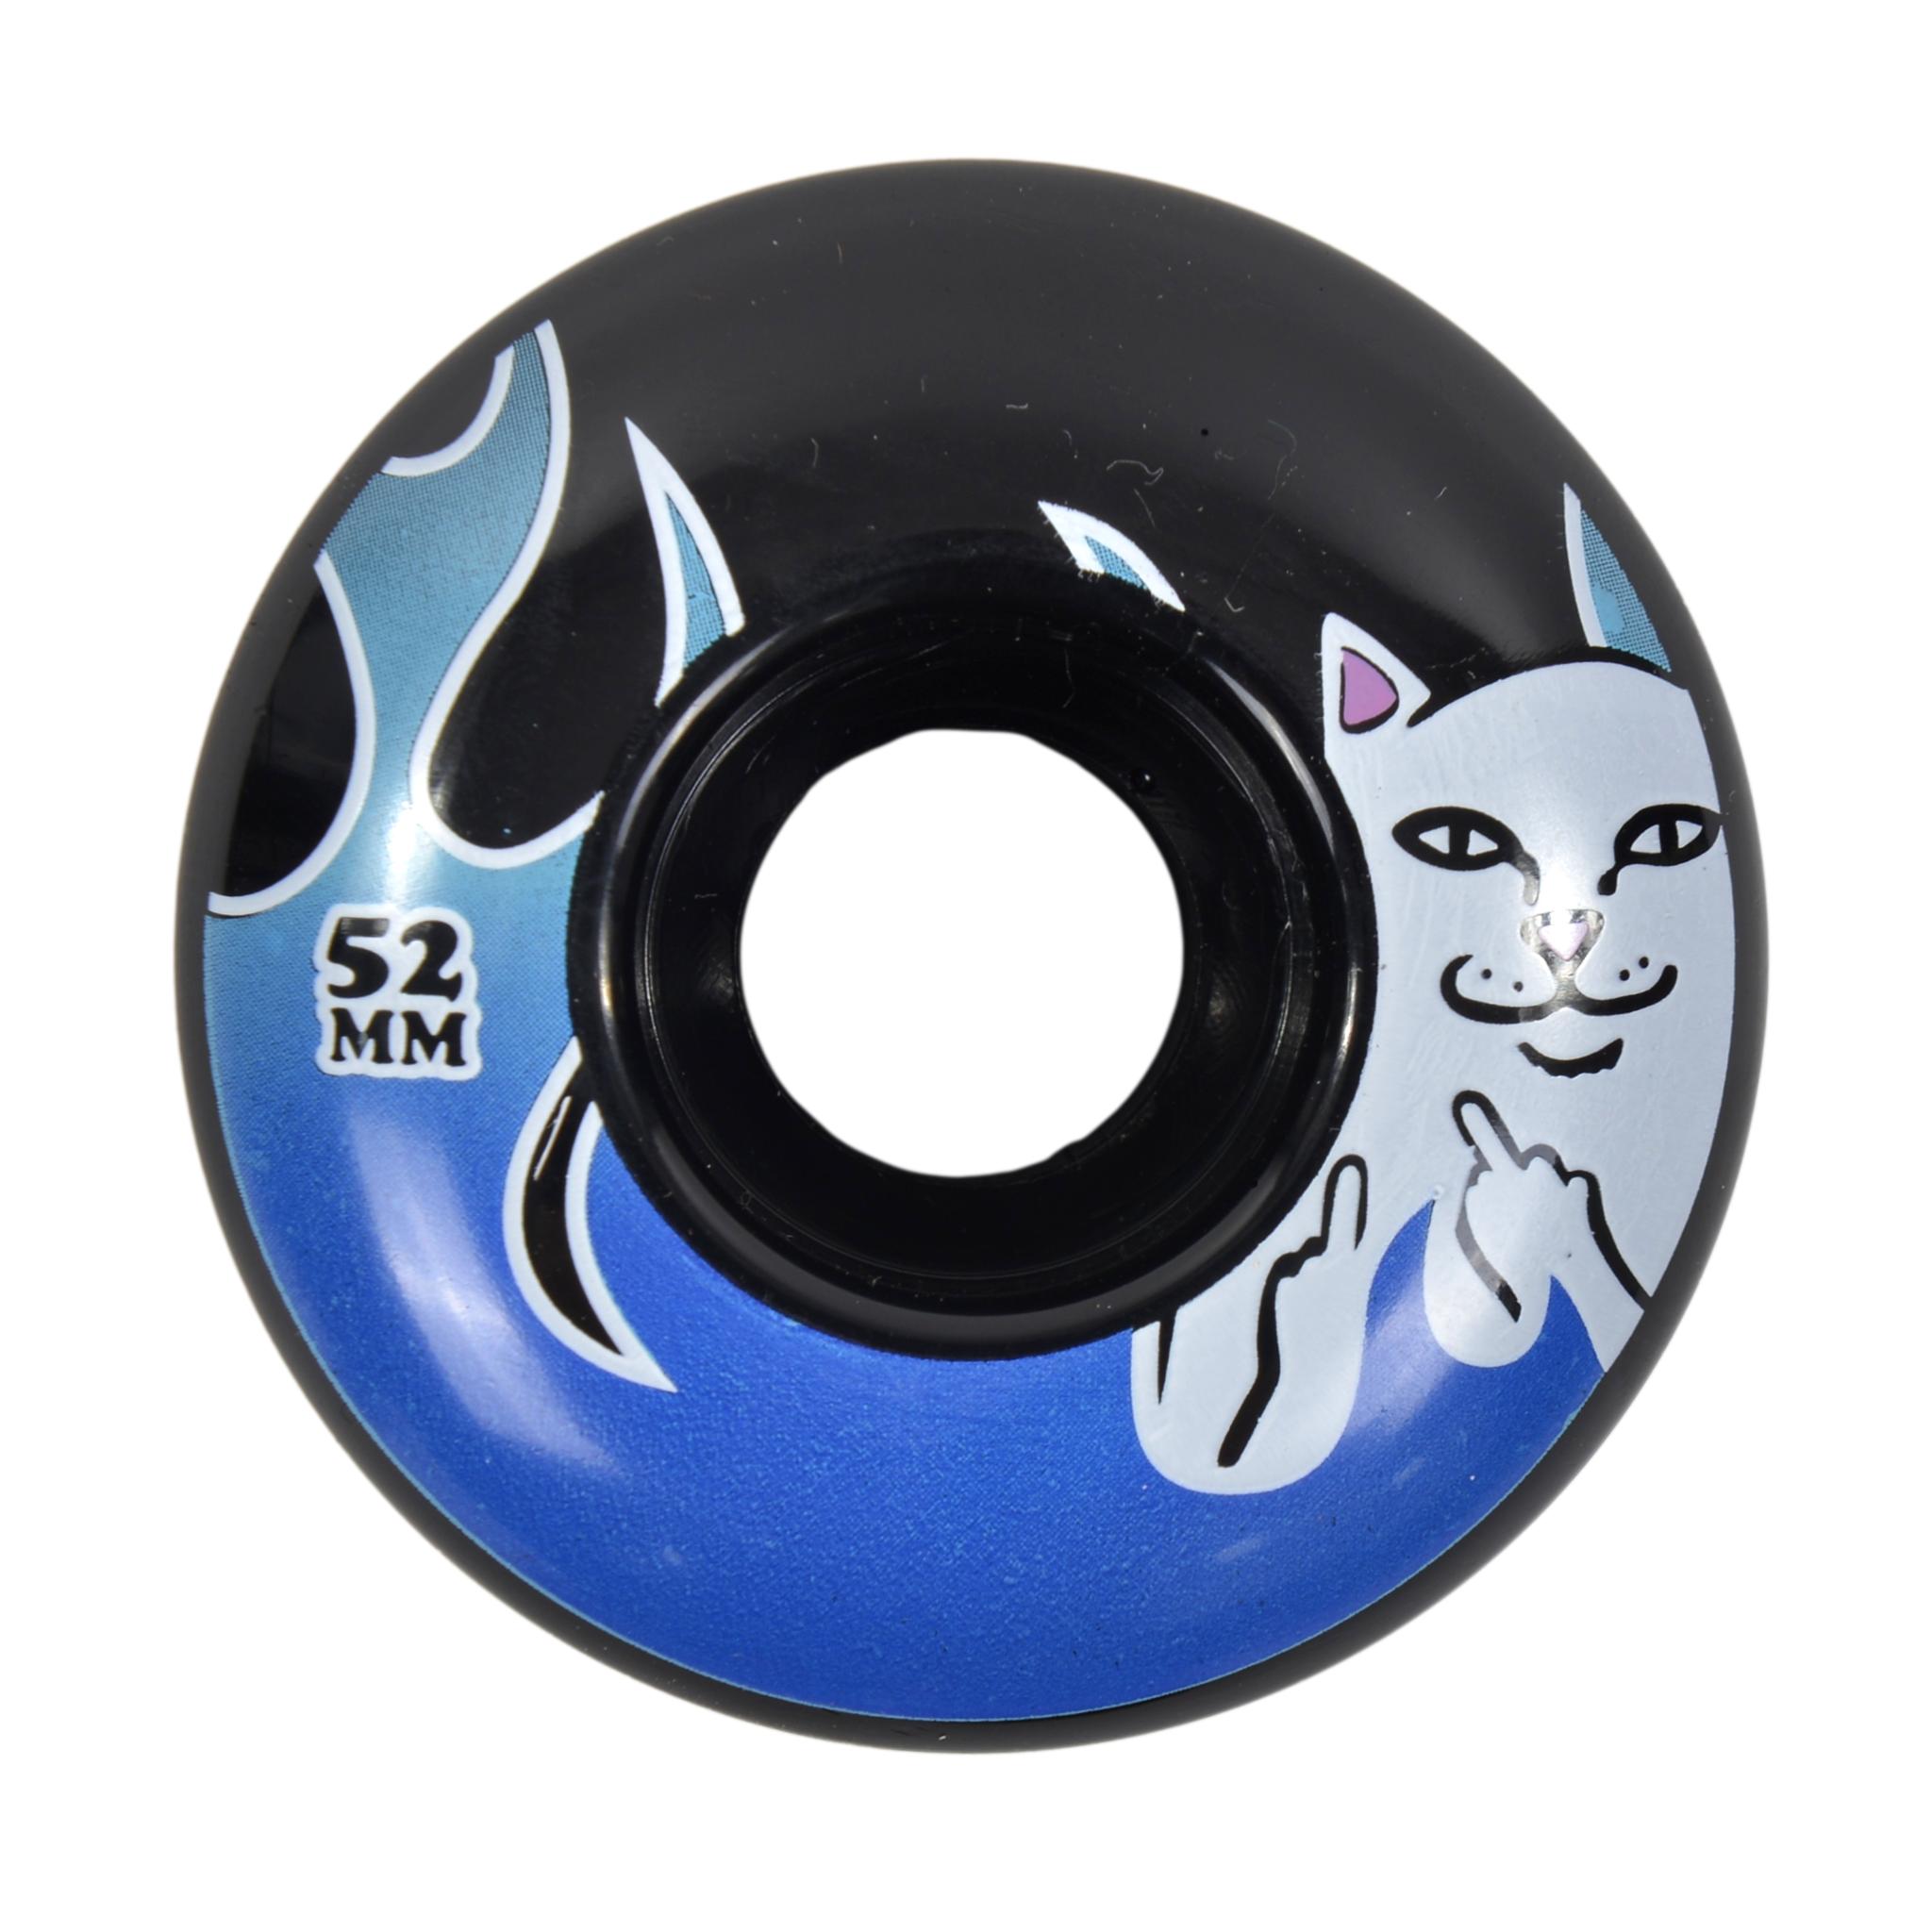 Ripndip Welcome To Heck Wheels 52MM 100A